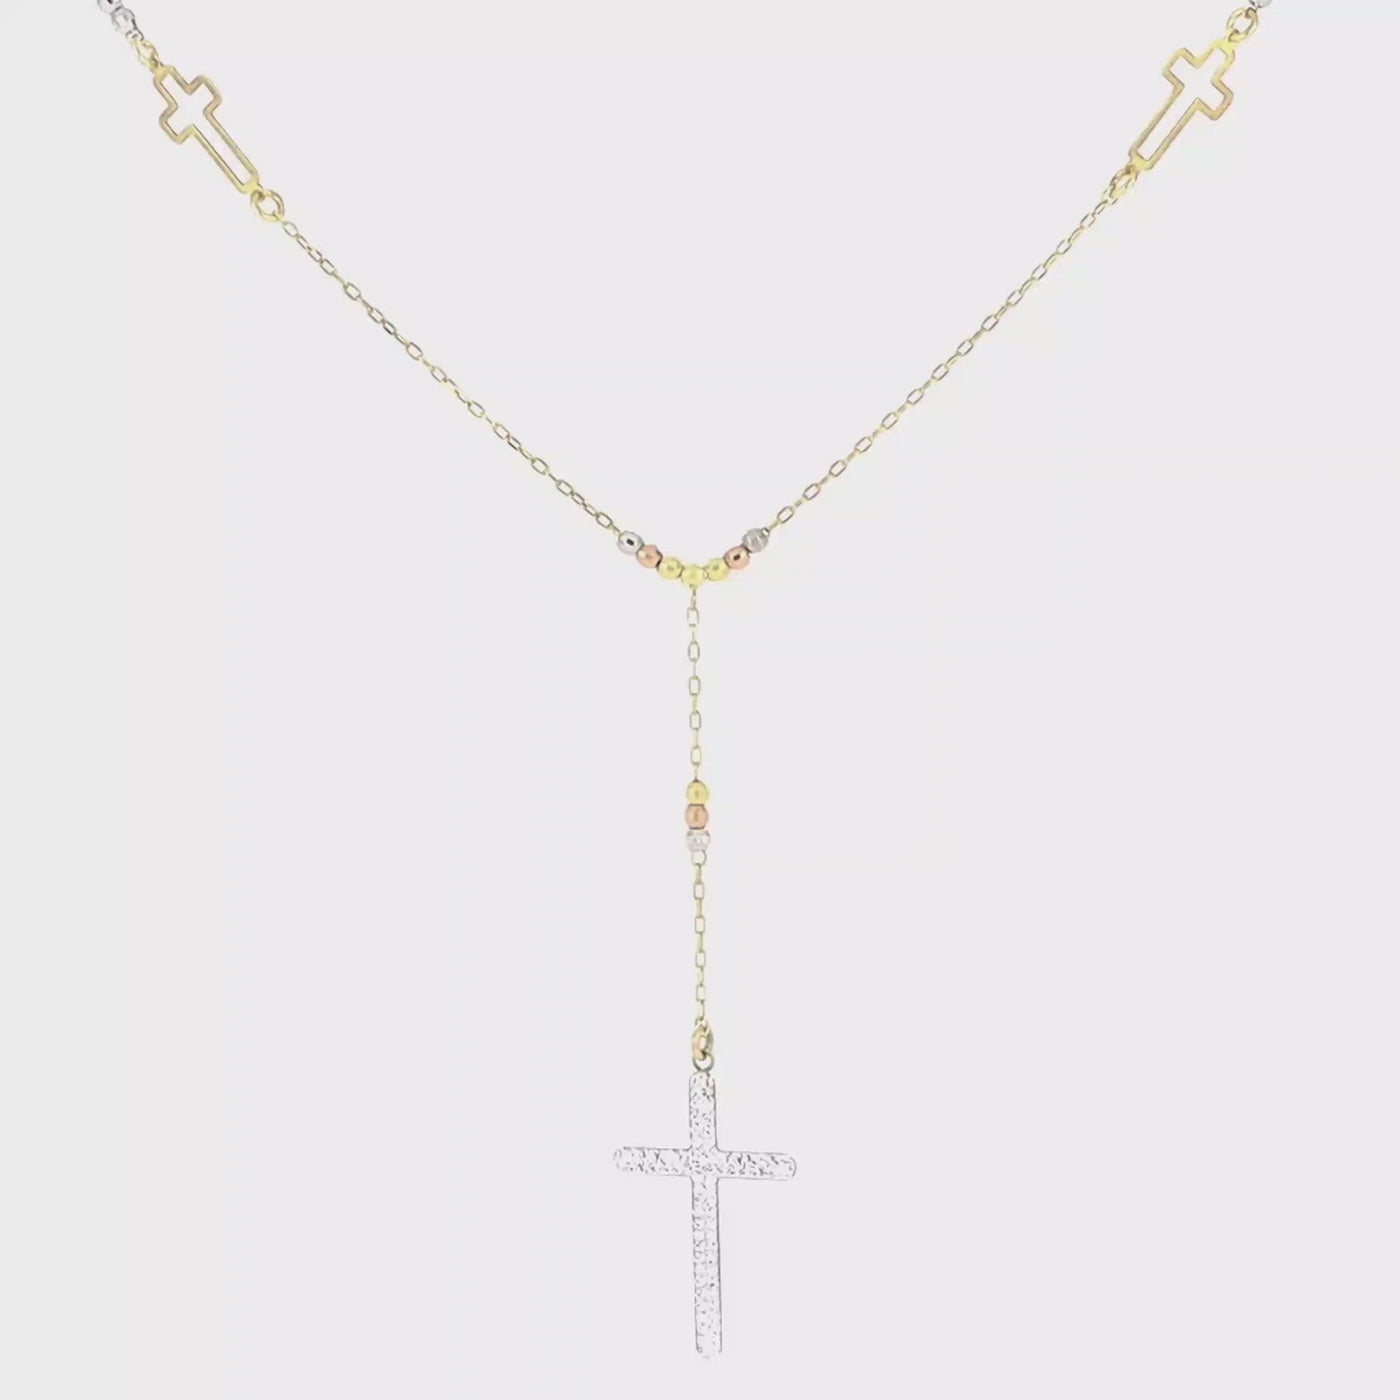 "The Miriam Miracle" Cross Necklace